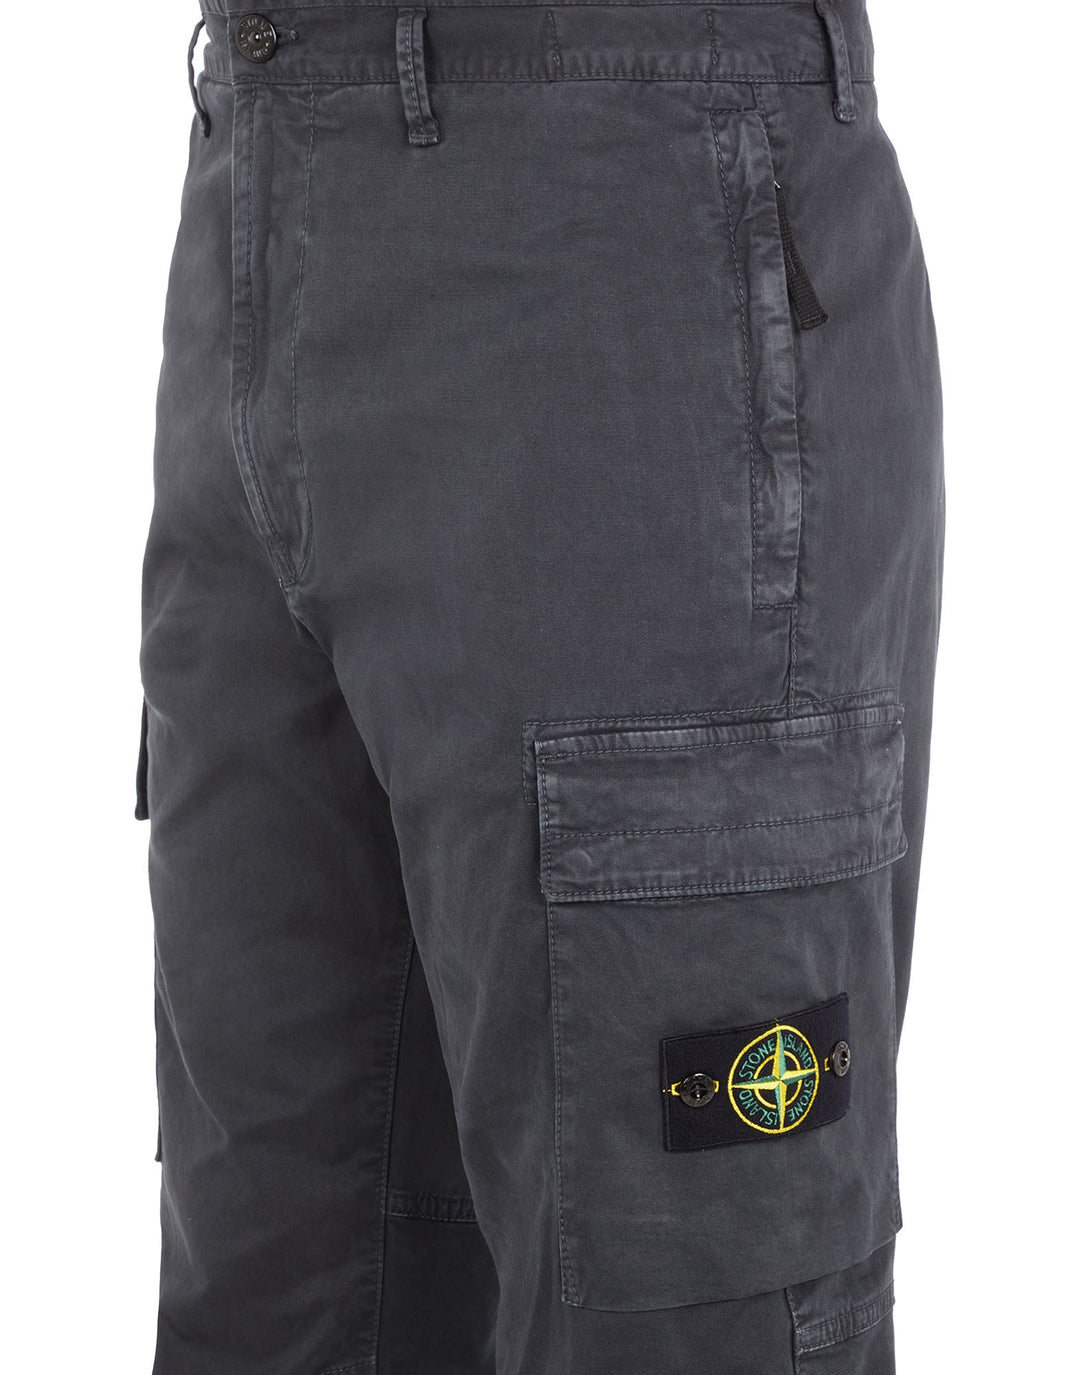 Old treatment regular fit cargo pants - CHARCOAL